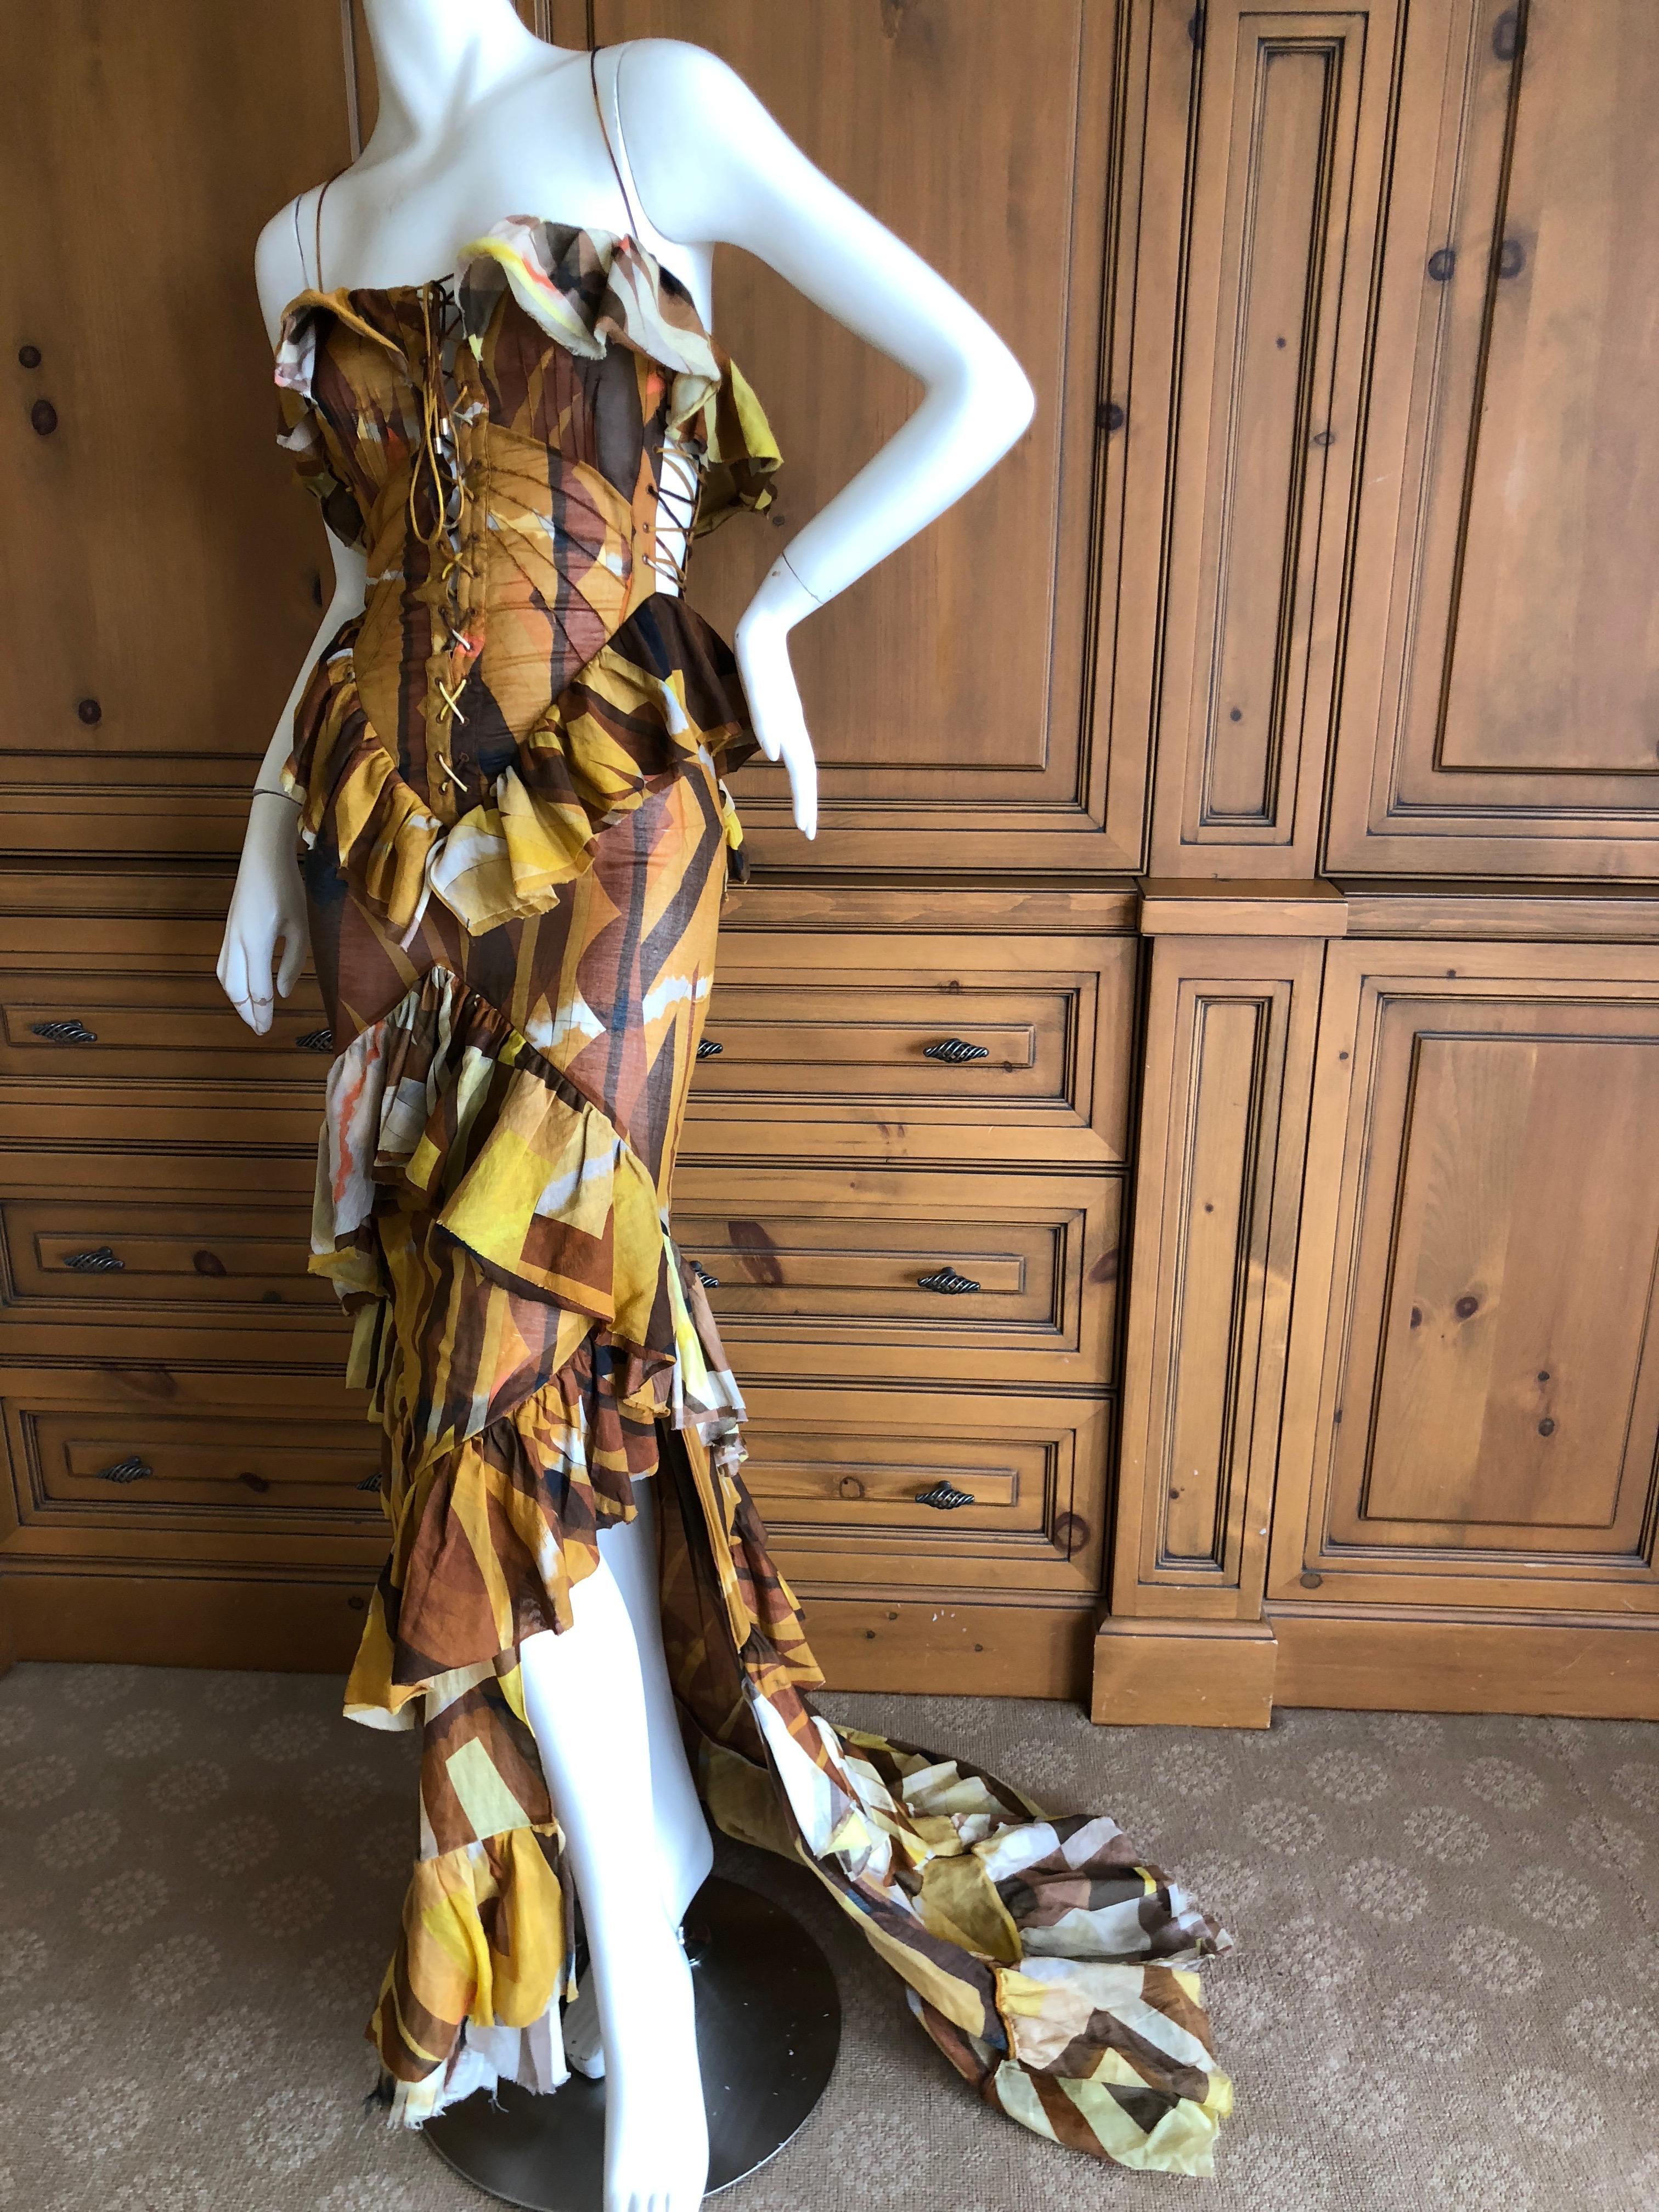 Emilio Pucci Tie Dye Pattern Ruffled Dress w Corset Lace Detailing  Peter Dundas In Excellent Condition For Sale In Cloverdale, CA